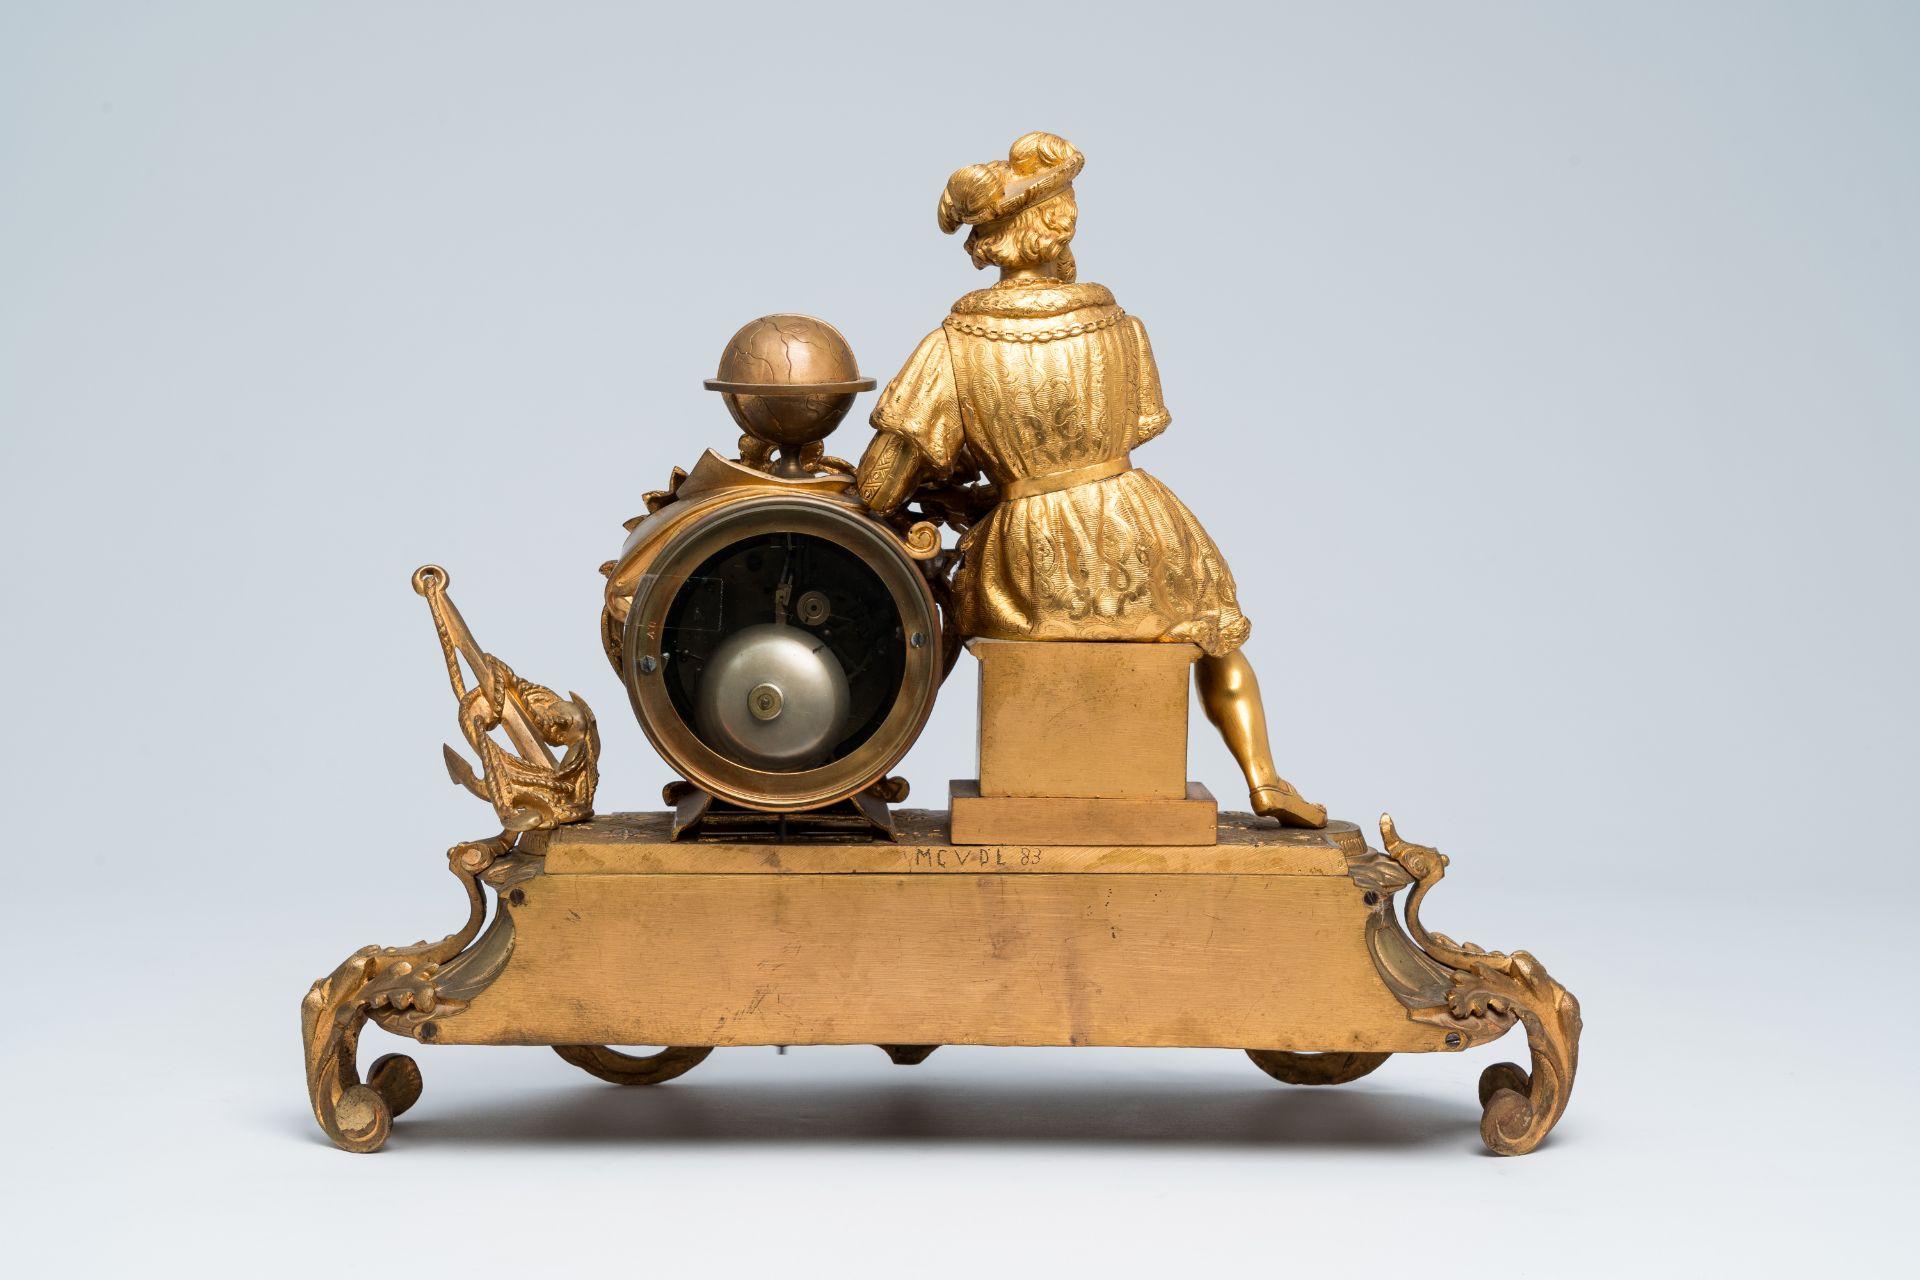 A French gilt bronze mounted mantel clock crowned with Christopher Columbus, 19th C. - Image 4 of 11